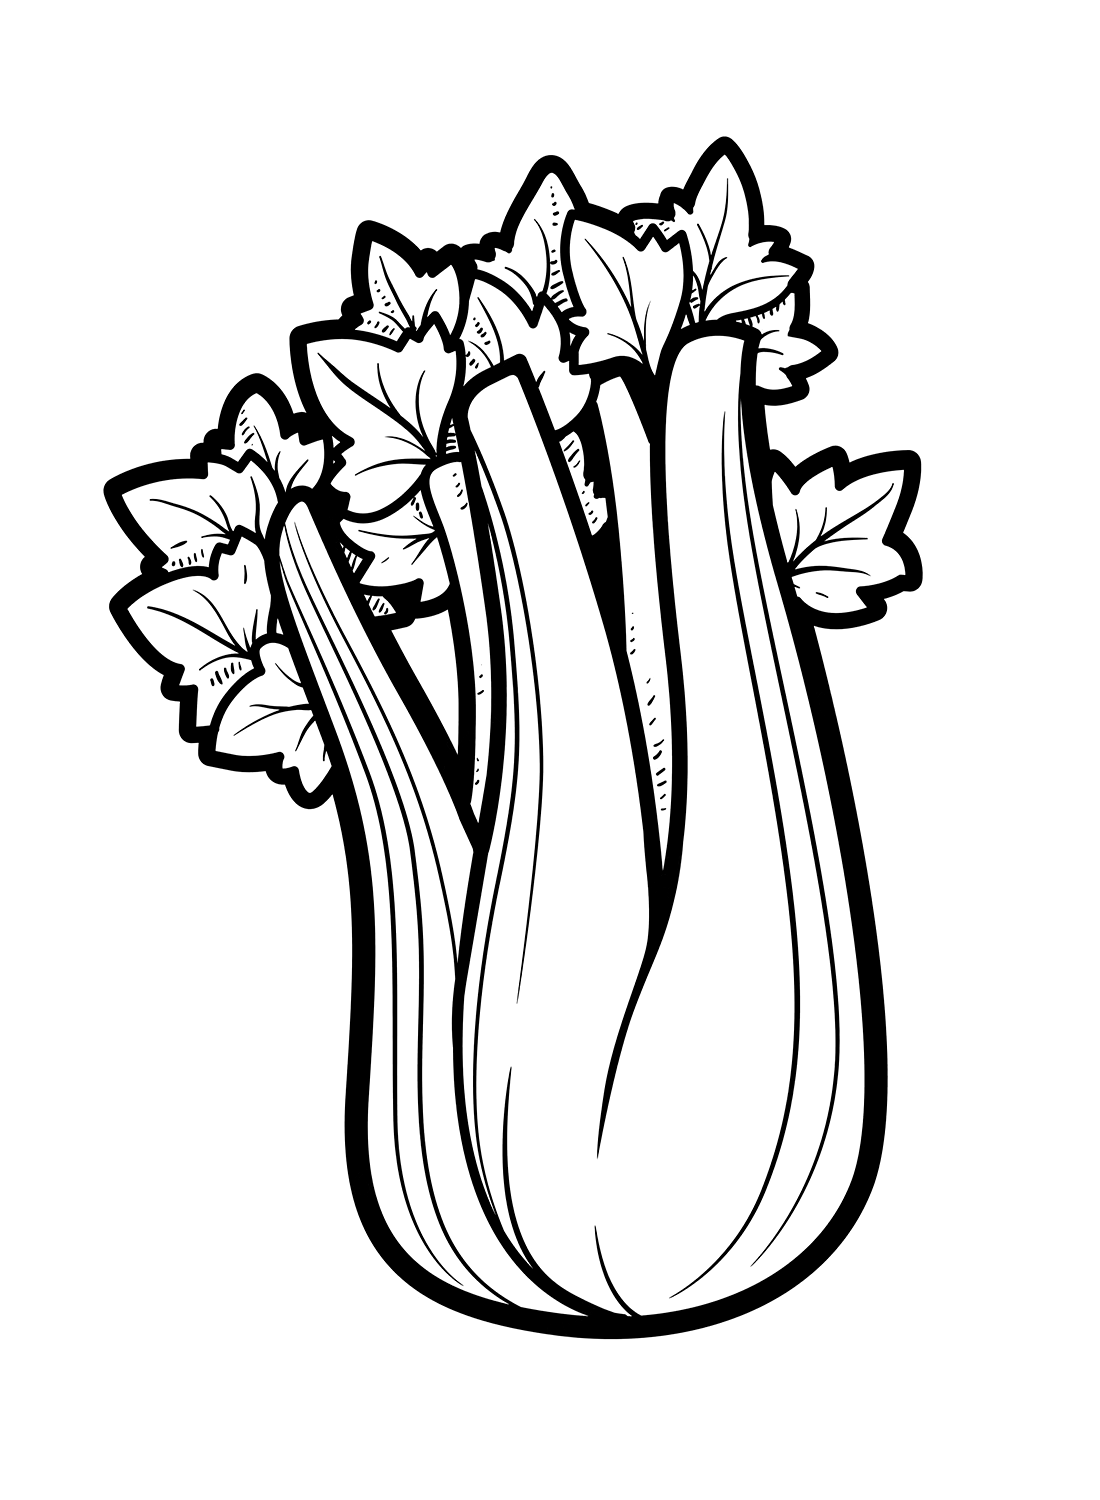 Celery Coloring Page Free from Celery